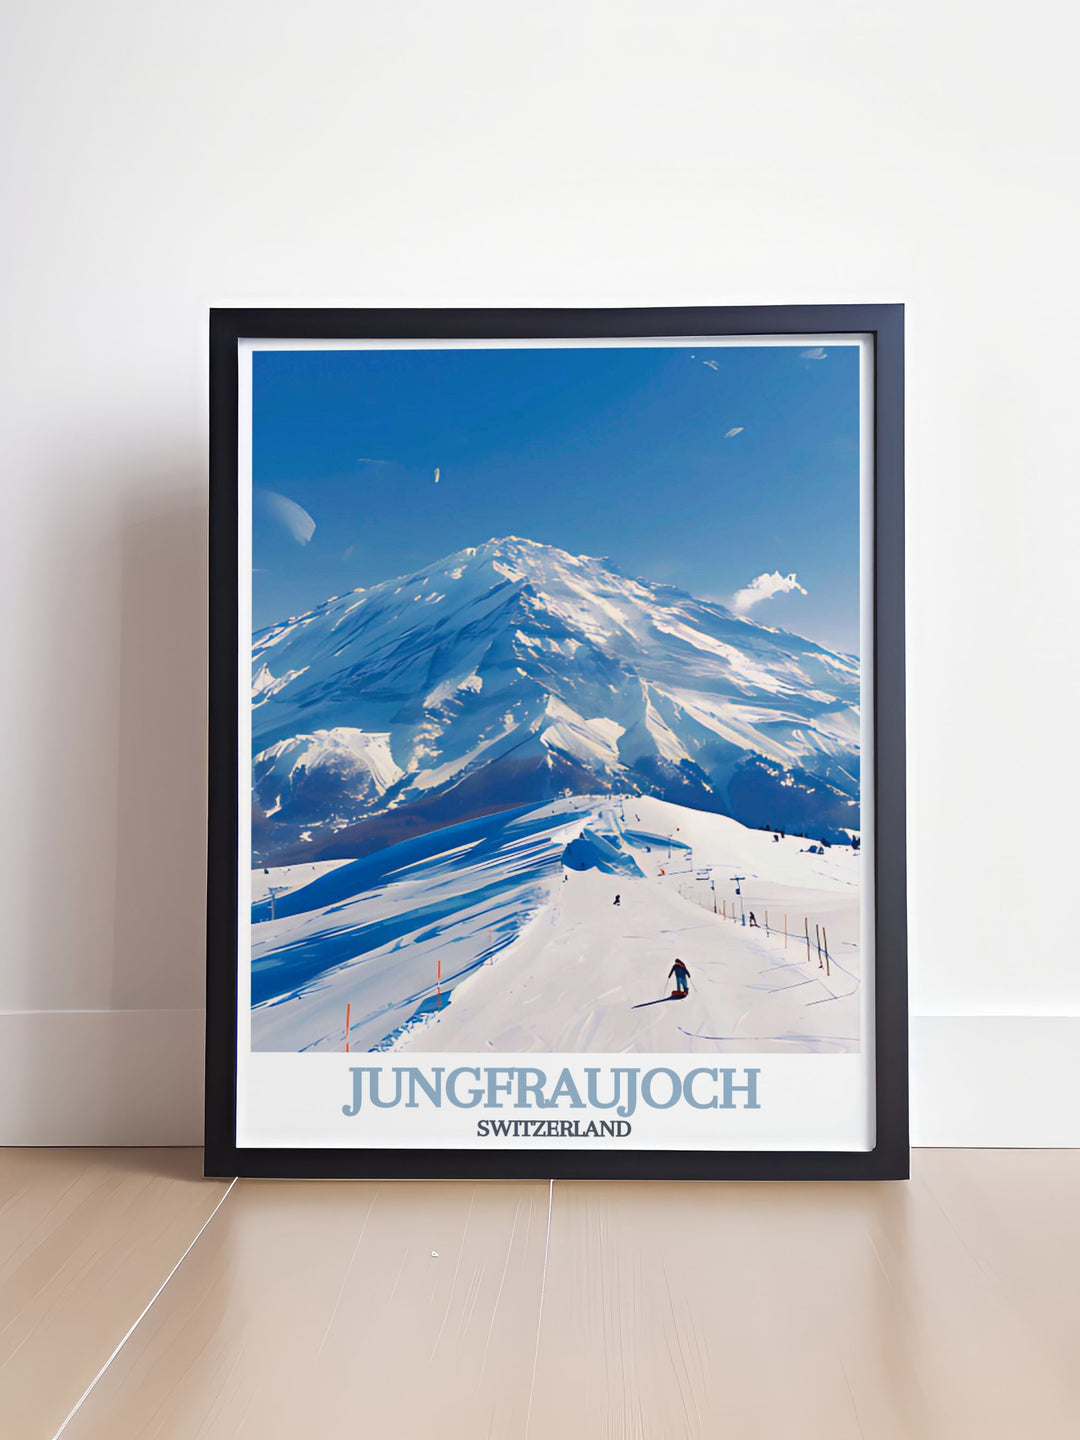 This travel print of Snow Fun Park in Switzerland captures the lively winter activities and the beautiful alpine setting, making it an ideal piece for those who love snow sports and mountain scenery.